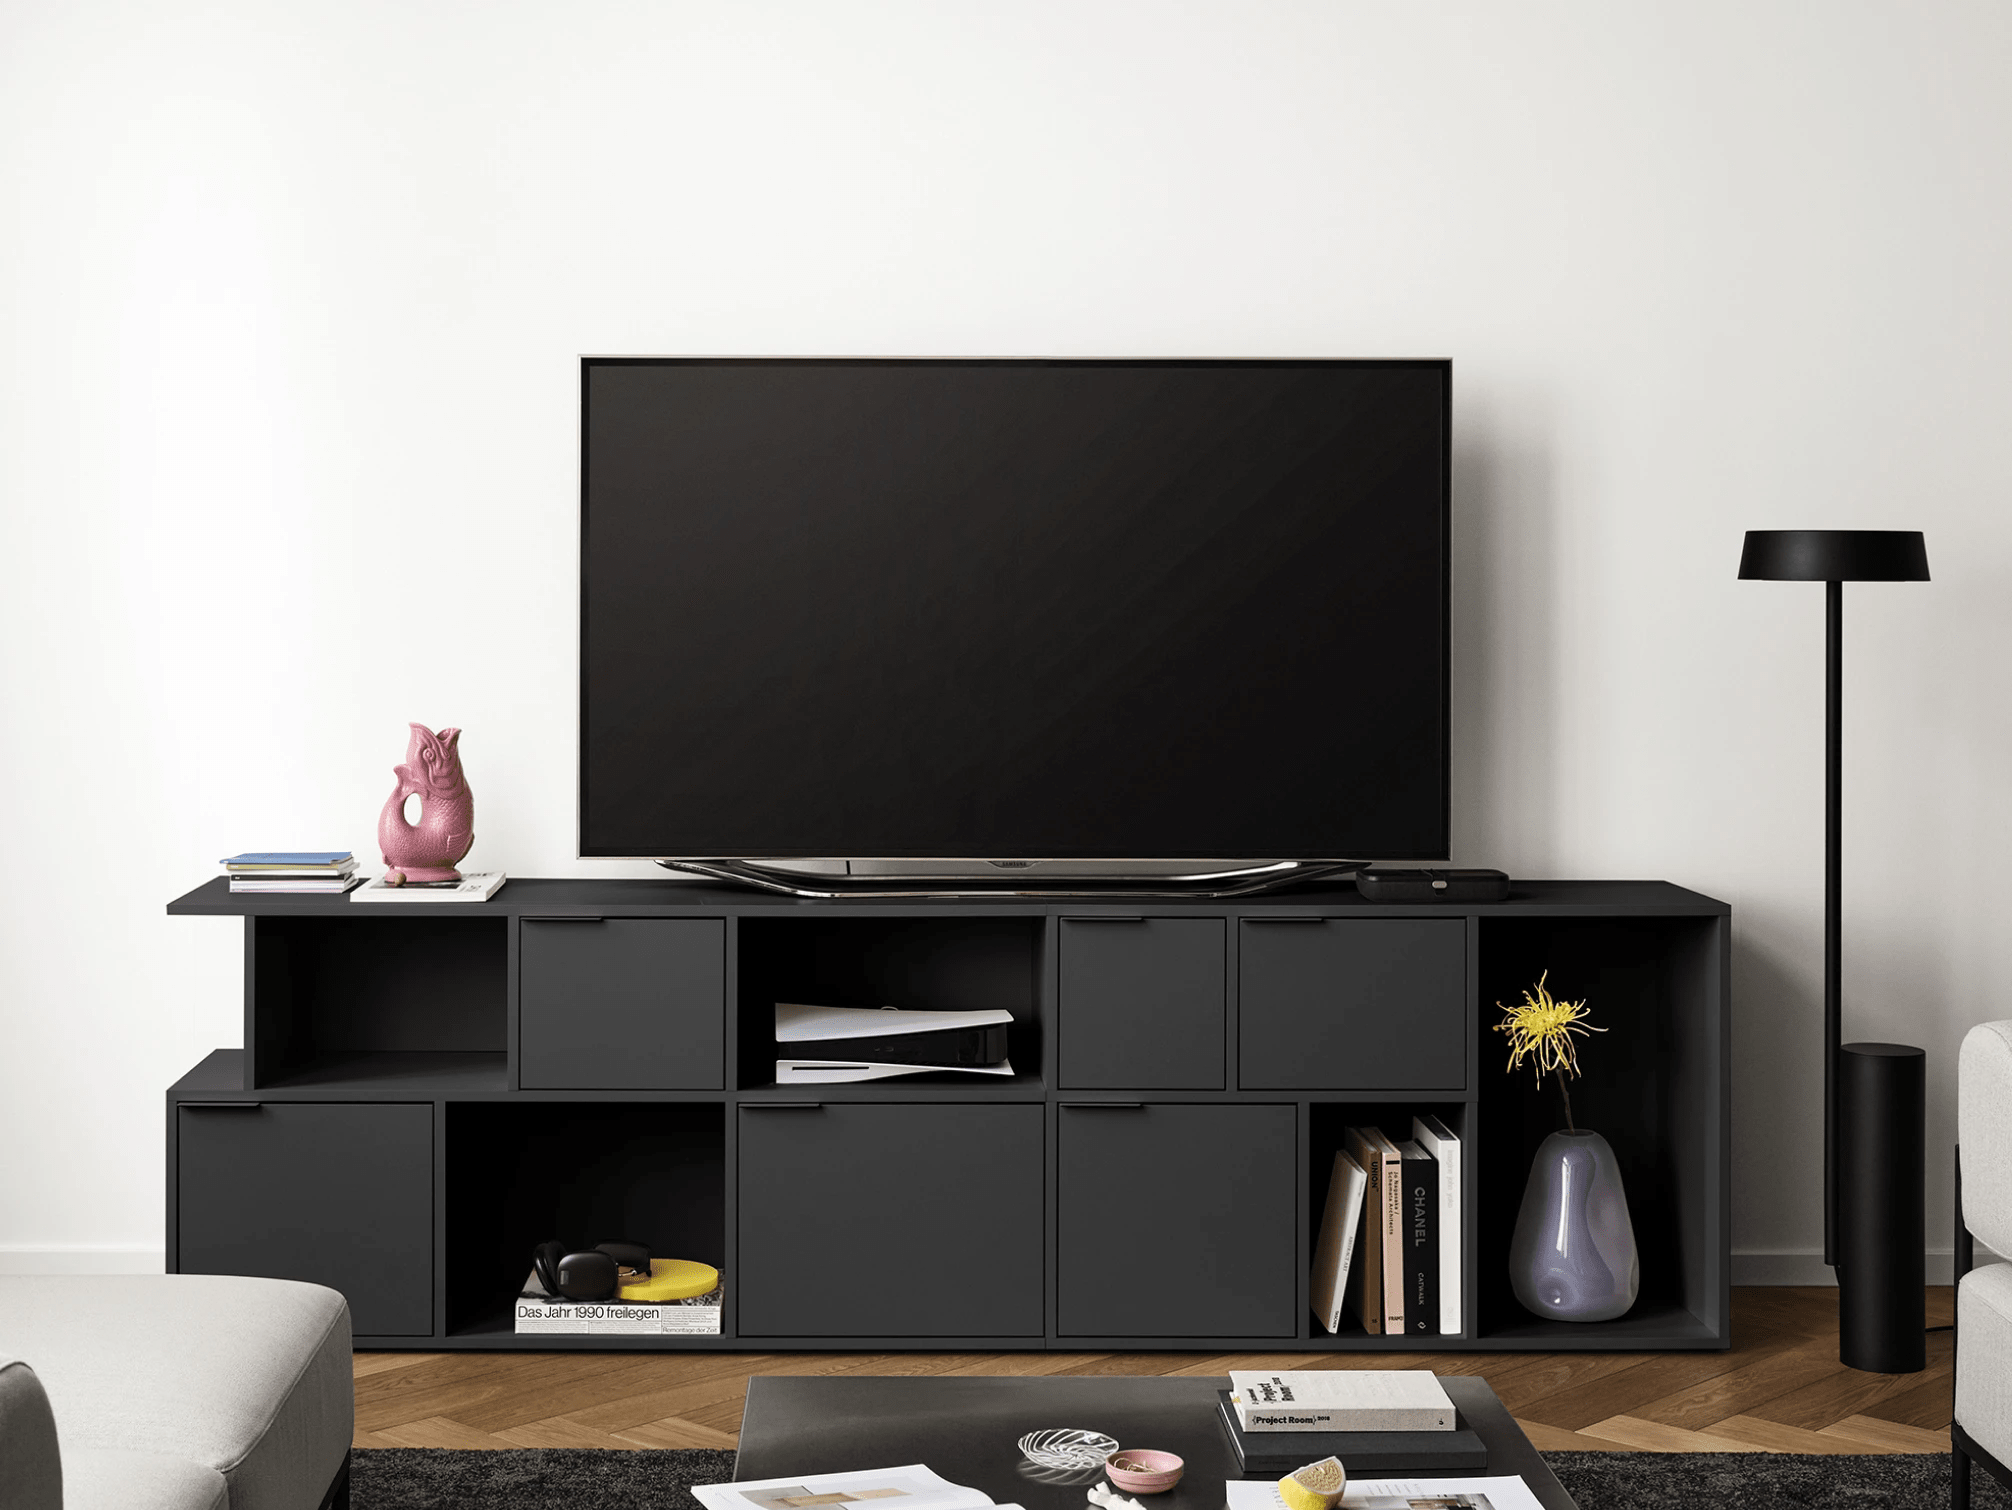 Small Common_Matte_Black Tv Stand with Drawers - 130x23x32cm 1